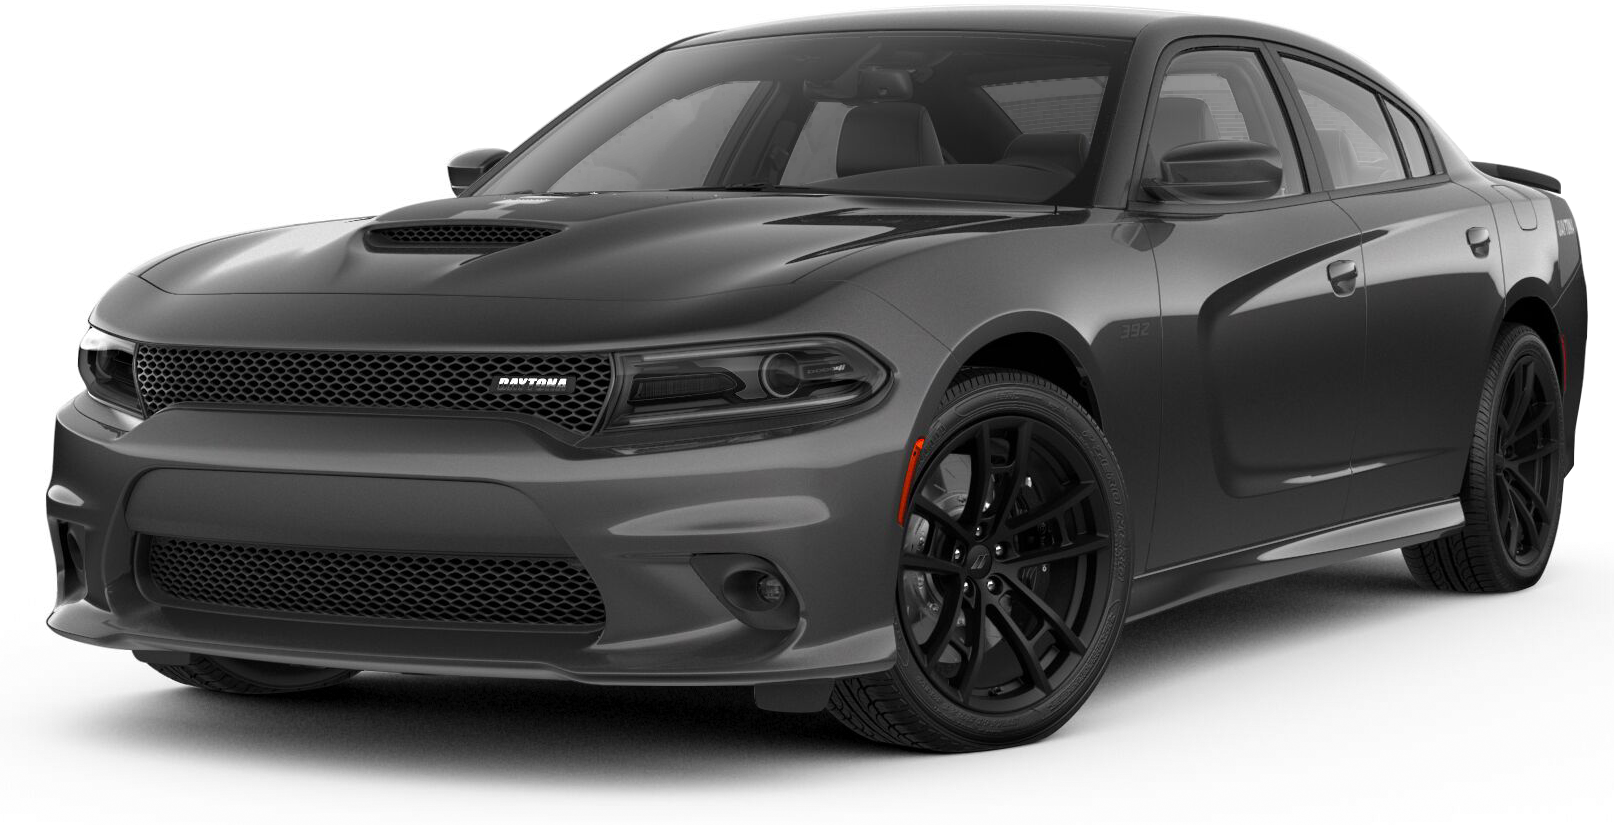 2018-dodge-charger-incentives-specials-offers-in-tamarac-fl